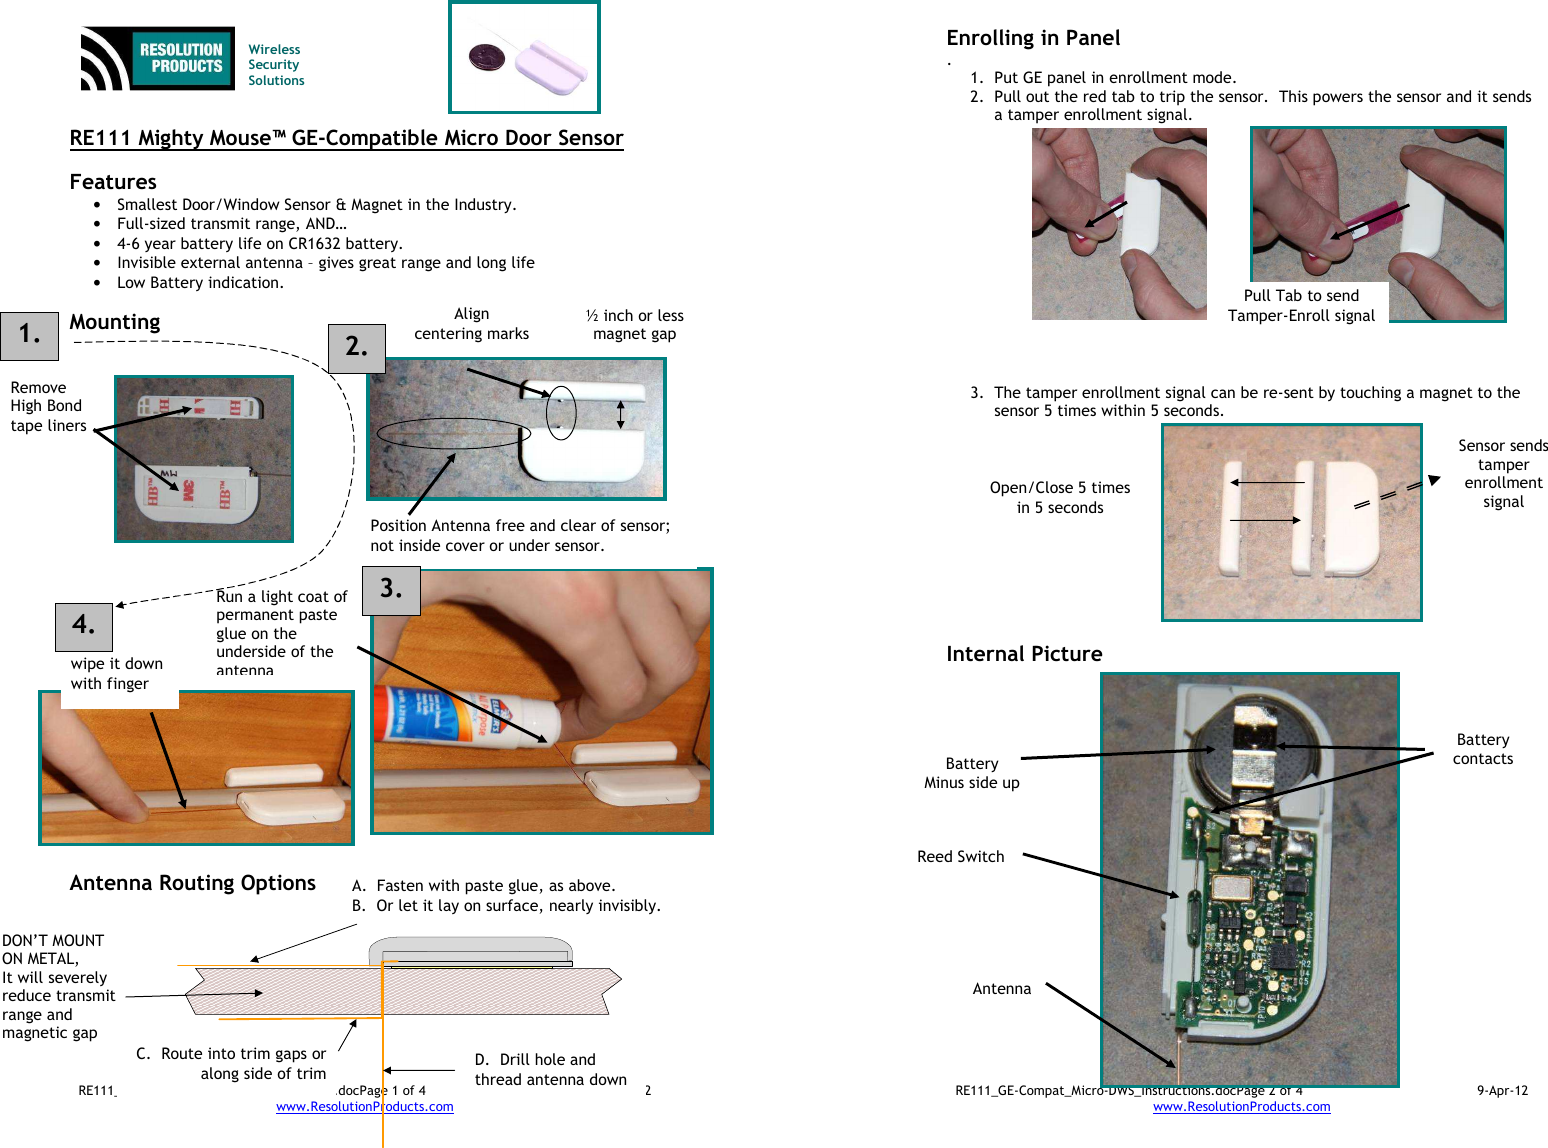 RE111_GE-Compat_Micro-DWS_Instructions.docPage 1 of 4  9-Apr-12 www.ResolutionProducts.com     RE111 Mighty Mouse™ GE-Compatible Micro Door Sensor  Features  • Smallest Door/Window Sensor &amp; Magnet in the Industry. • Full-sized transmit range, AND… • 4-6 year battery life on CR1632 battery. • Invisible external antenna – gives great range and long life • Low Battery indication.  Mounting                              Antenna Routing Options   Wireless  Security  Solutions Run a light coat of permanent paste glue on the underside of the antenna wipe it down with finger Remove High Bond tape liners Align centering marks Position Antenna free and clear of sensor; not inside cover or under sensor. DON’T MOUNT ON METAL, It will severely reduce transmit range and magnetic gap A.  Fasten with paste glue, as above.   B.  Or let it lay on surface, nearly invisibly. D.  Drill hole and thread antenna down C.  Route into trim gaps or along side of trim 1. 2. ½ inch or less magnet gap 3. 4. RE111_GE-Compat_Micro-DWS_Instructions.docPage 2 of 4  9-Apr-12 www.ResolutionProducts.com  Enrolling in Panel . 1. Put GE panel in enrollment mode. 2. Pull out the red tab to trip the sensor.  This powers the sensor and it sends a tamper enrollment signal.               3. The tamper enrollment signal can be re-sent by touching a magnet to the sensor 5 times within 5 seconds.             Internal Picture Pull Tab to send Tamper-Enroll signal Open/Close 5 times in 5 seconds Sensor sends tamper enrollment signal  Battery Minus side up  Reed Switch  Antenna  Battery contacts  